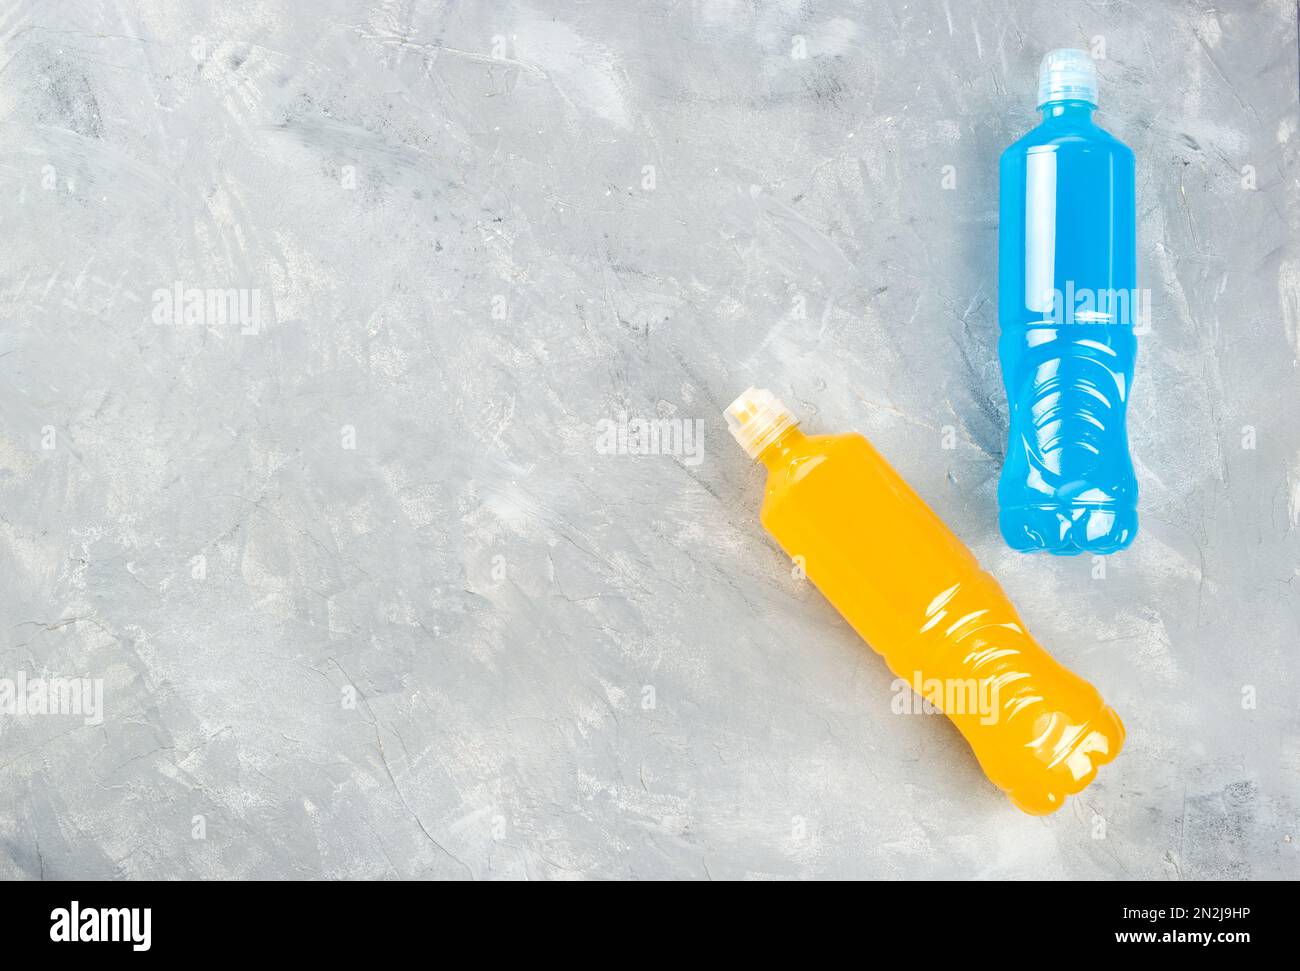 Two plastic bottles and blue and orange isotonic drinks on a light background, top view, copy space. Stock Photo